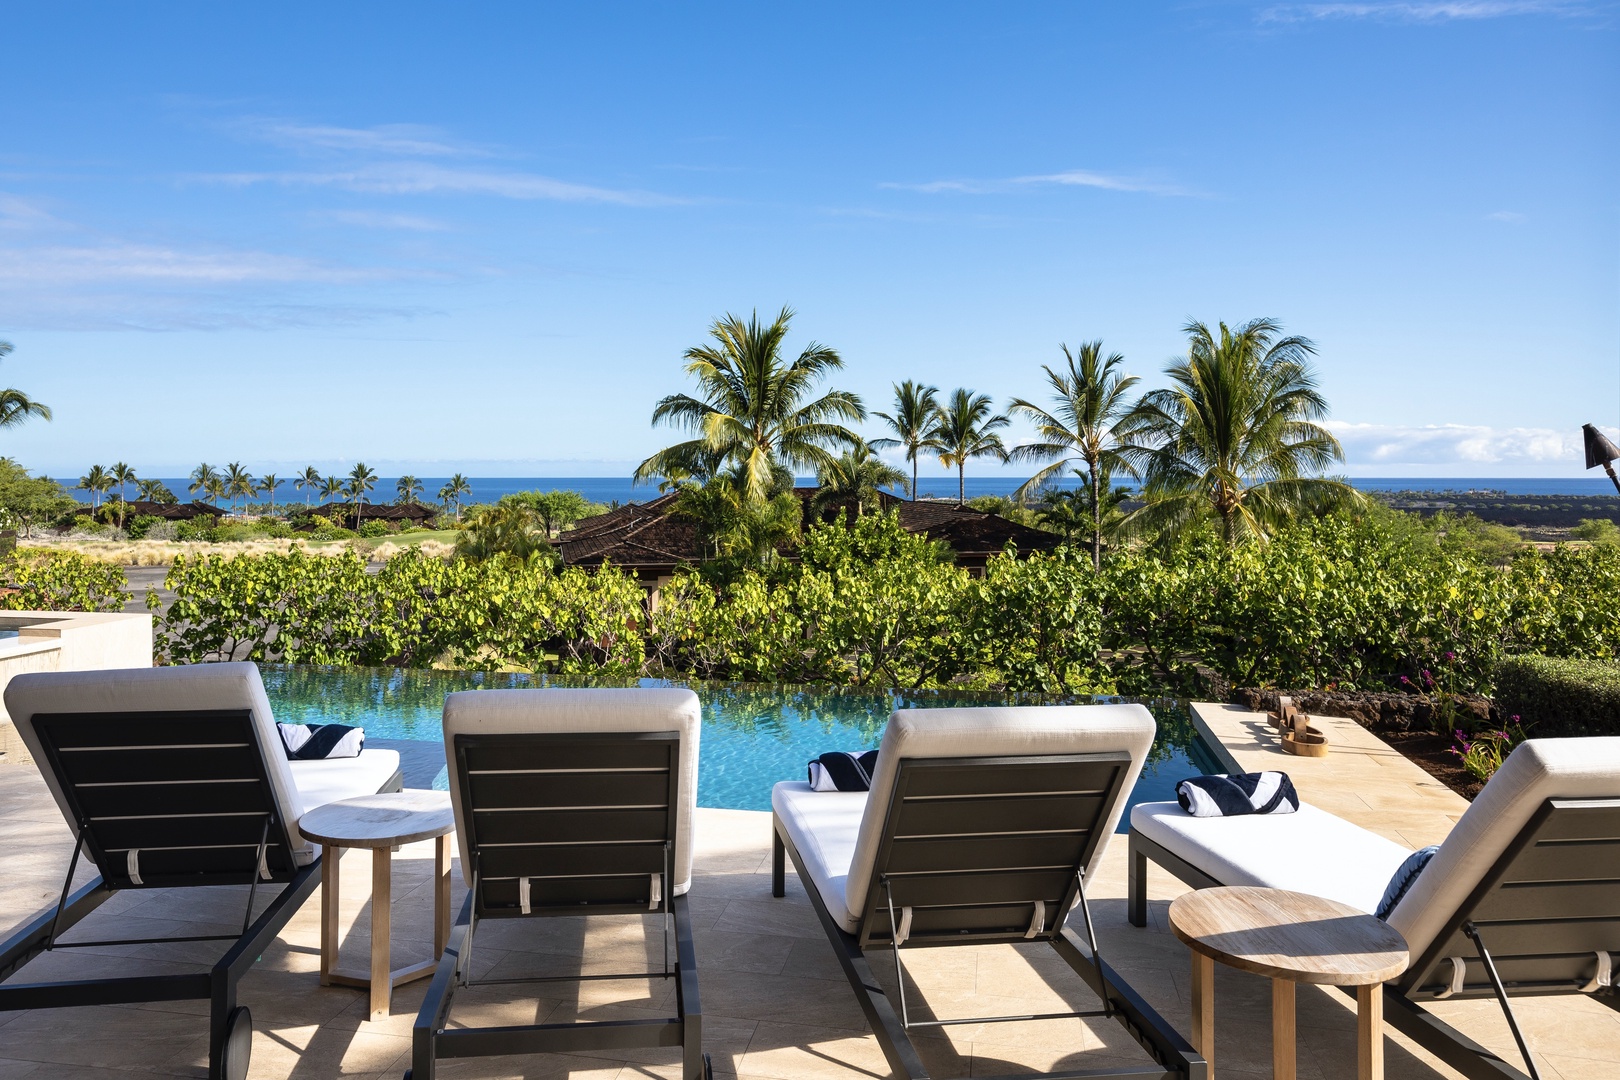 Kailua Kona Vacation Rentals, 4BD Kulanakauhale (3558) Estate Home at Four Seasons Resort at Hualalai - Poolside loungers offer endless relaxation opportunities.